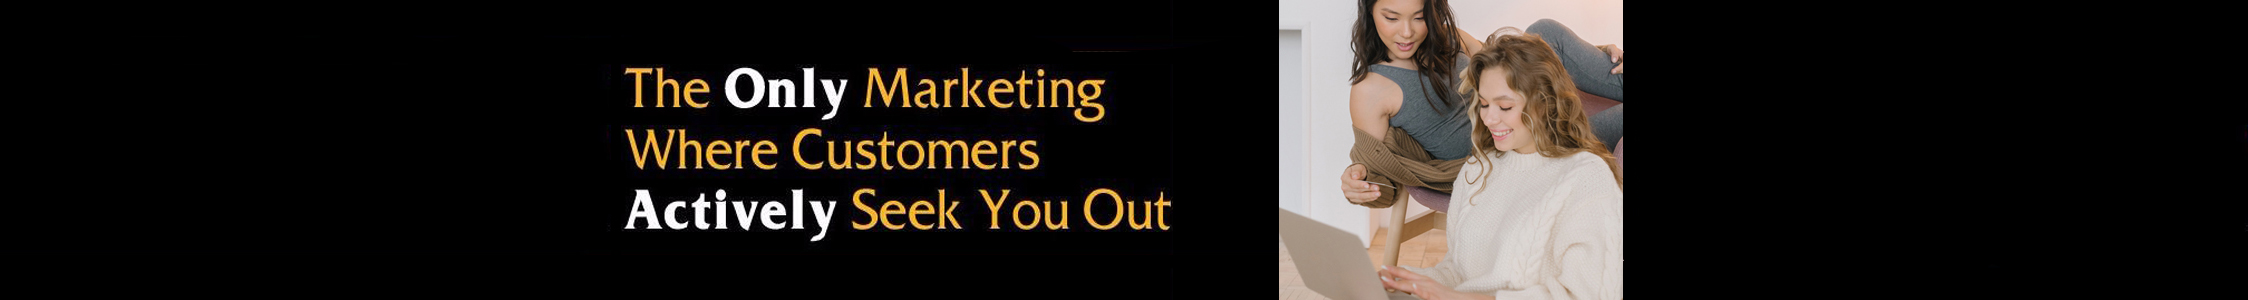 The Only Marketing Where People Actively Seek You Out